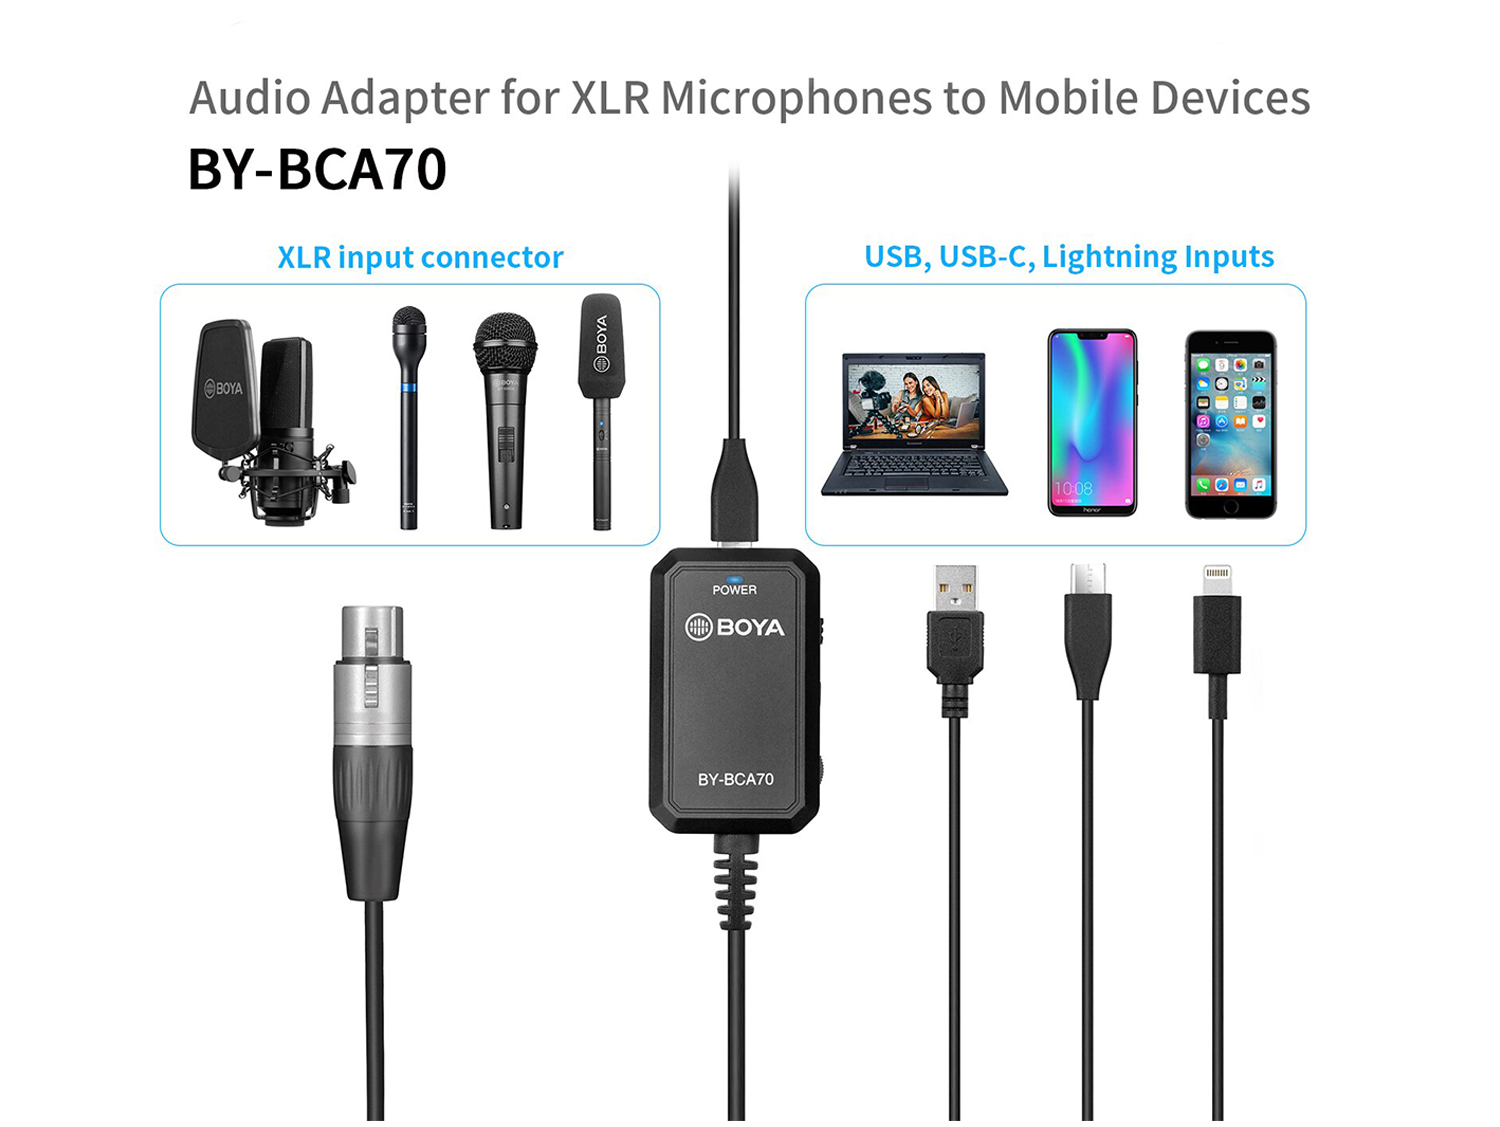 Boya's BY-BCA70 is a professional XLR audio adapter which is specially designed for increasing the convenient flexibility of your XLR microphone to most mobile devices.